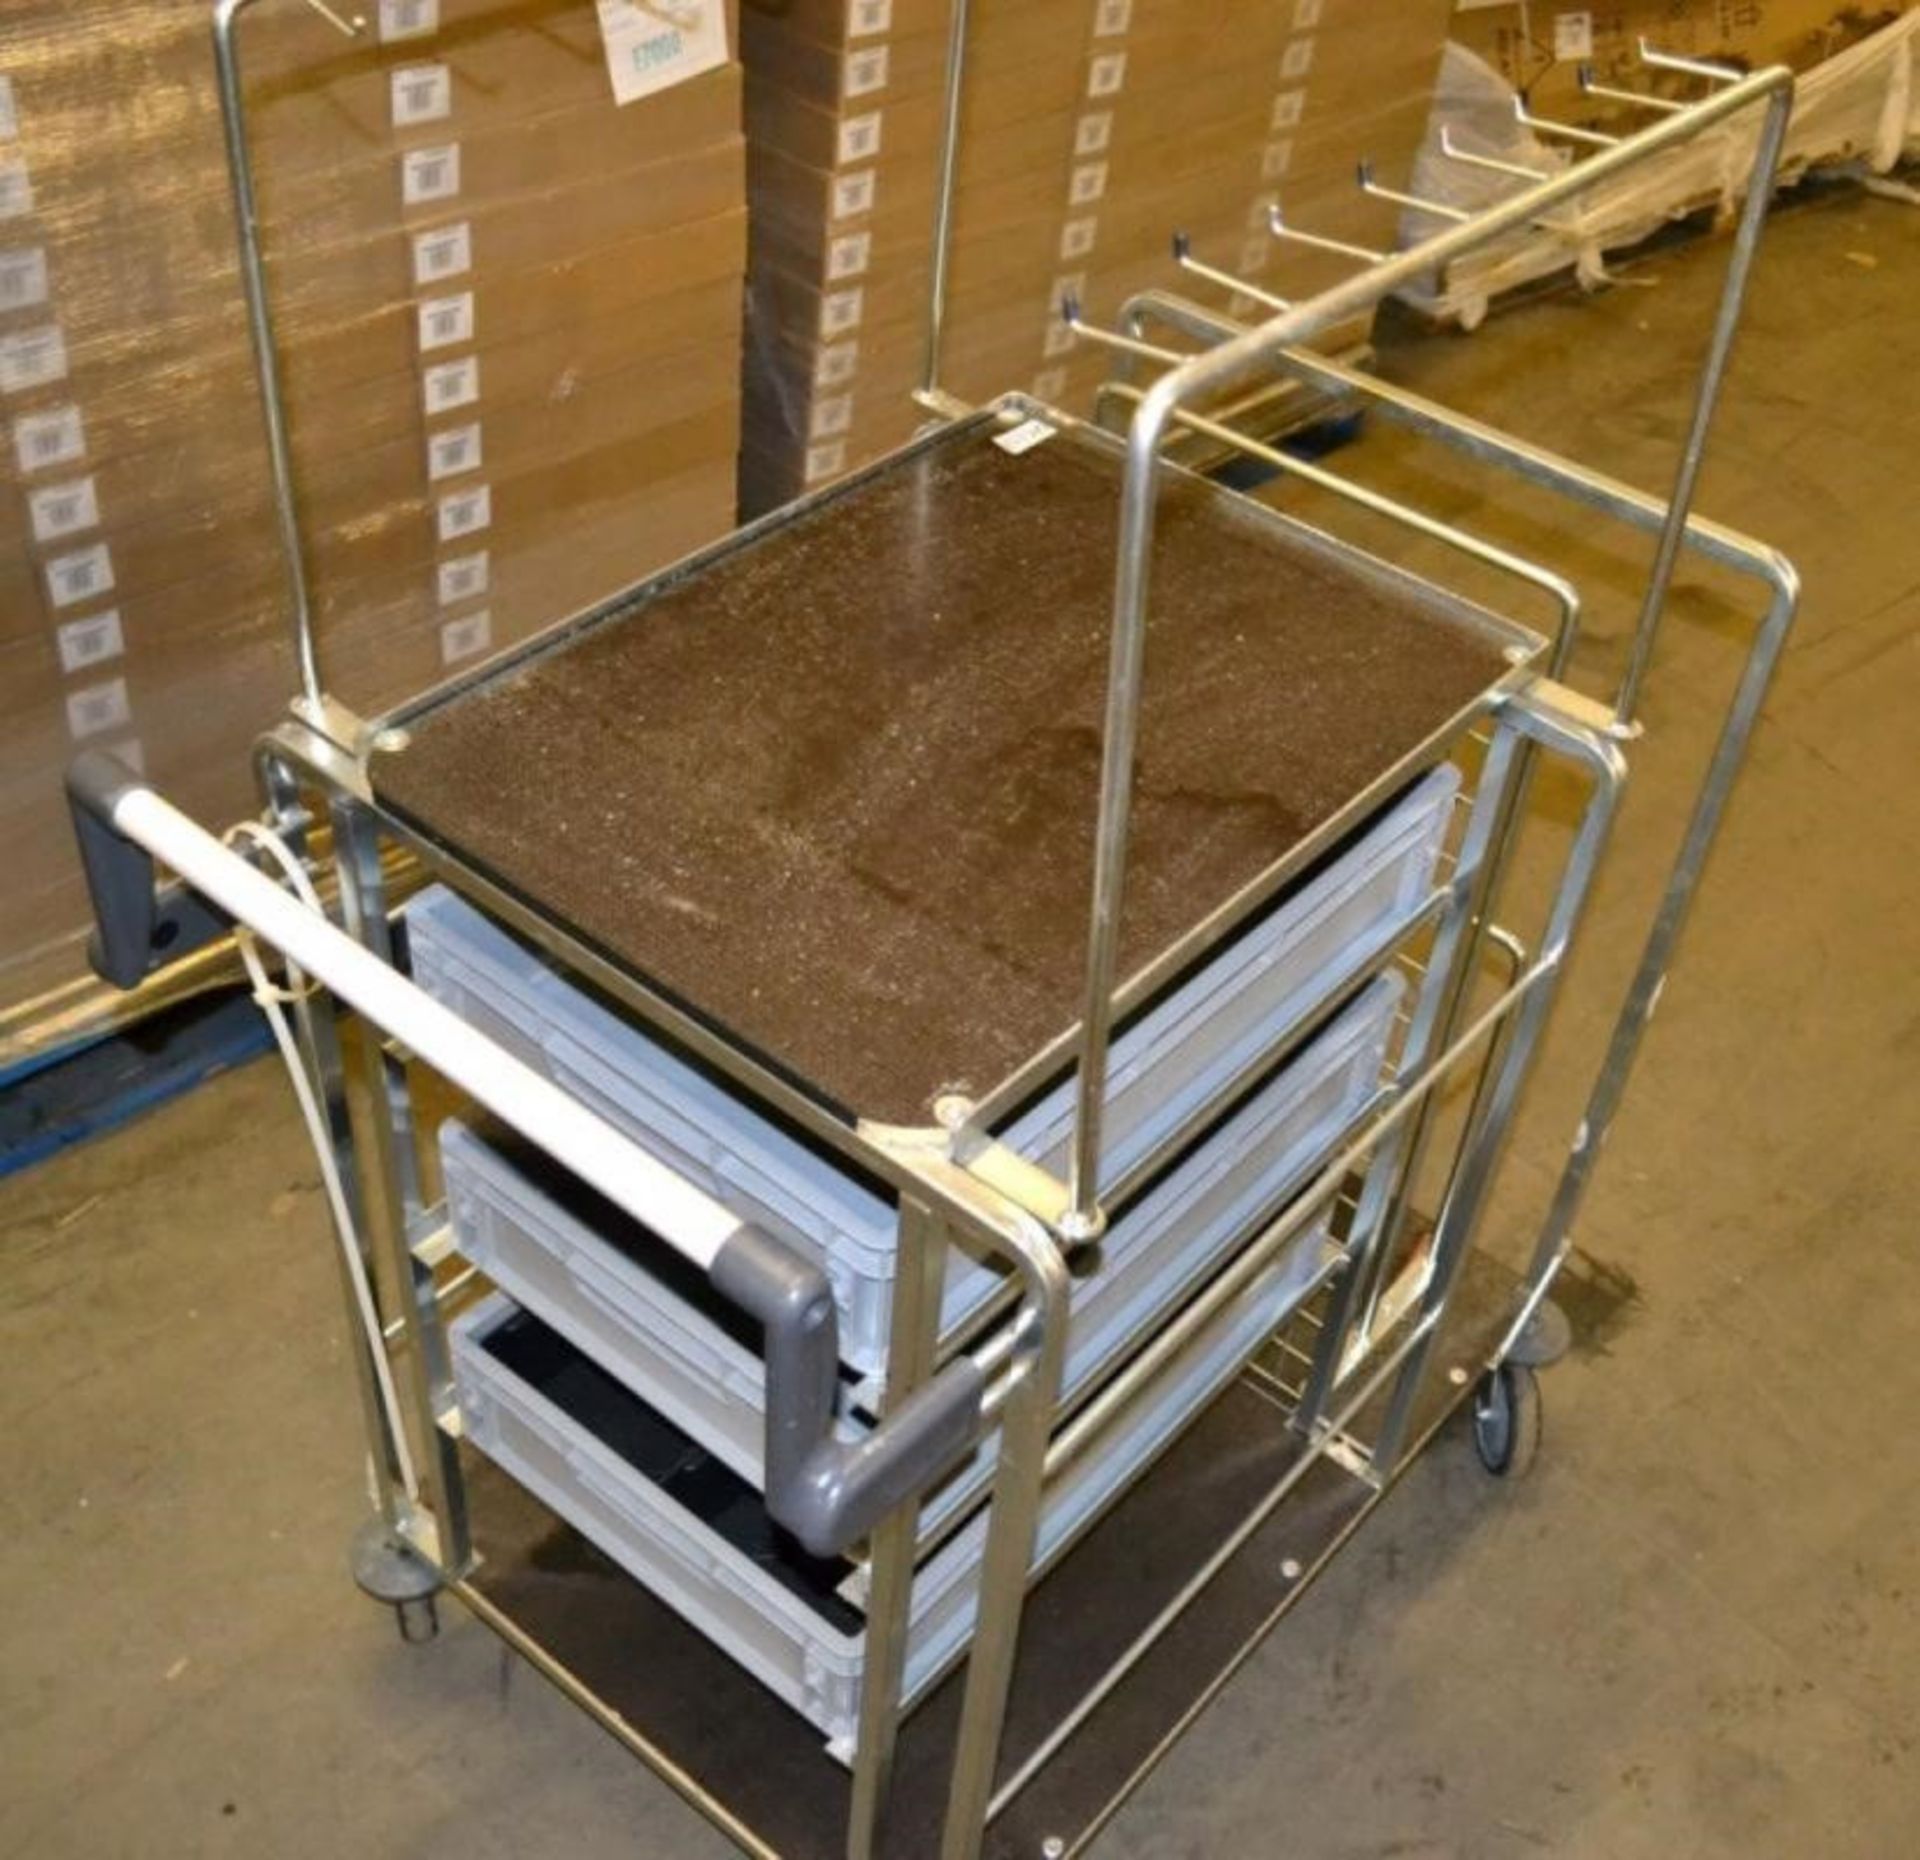 1 x 3-Drawer Warehouse Picking / Transport Trolley - Dimensions: 103 x 64 x 144cm - Ref: MC122 - CL2 - Image 2 of 7